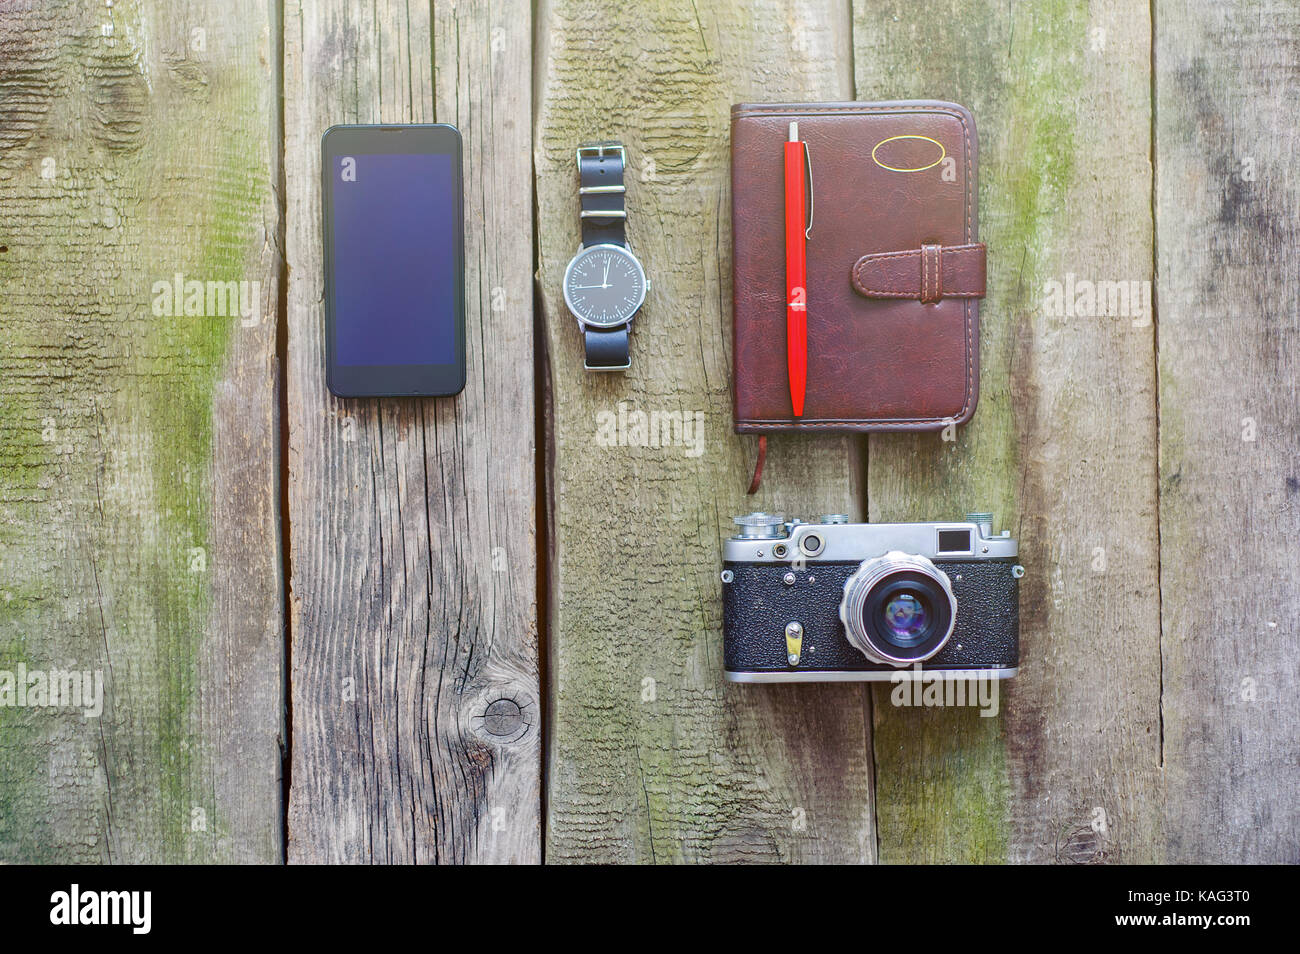 things to bring when travelling abroad, phone, camera, watch, note Stock Photo